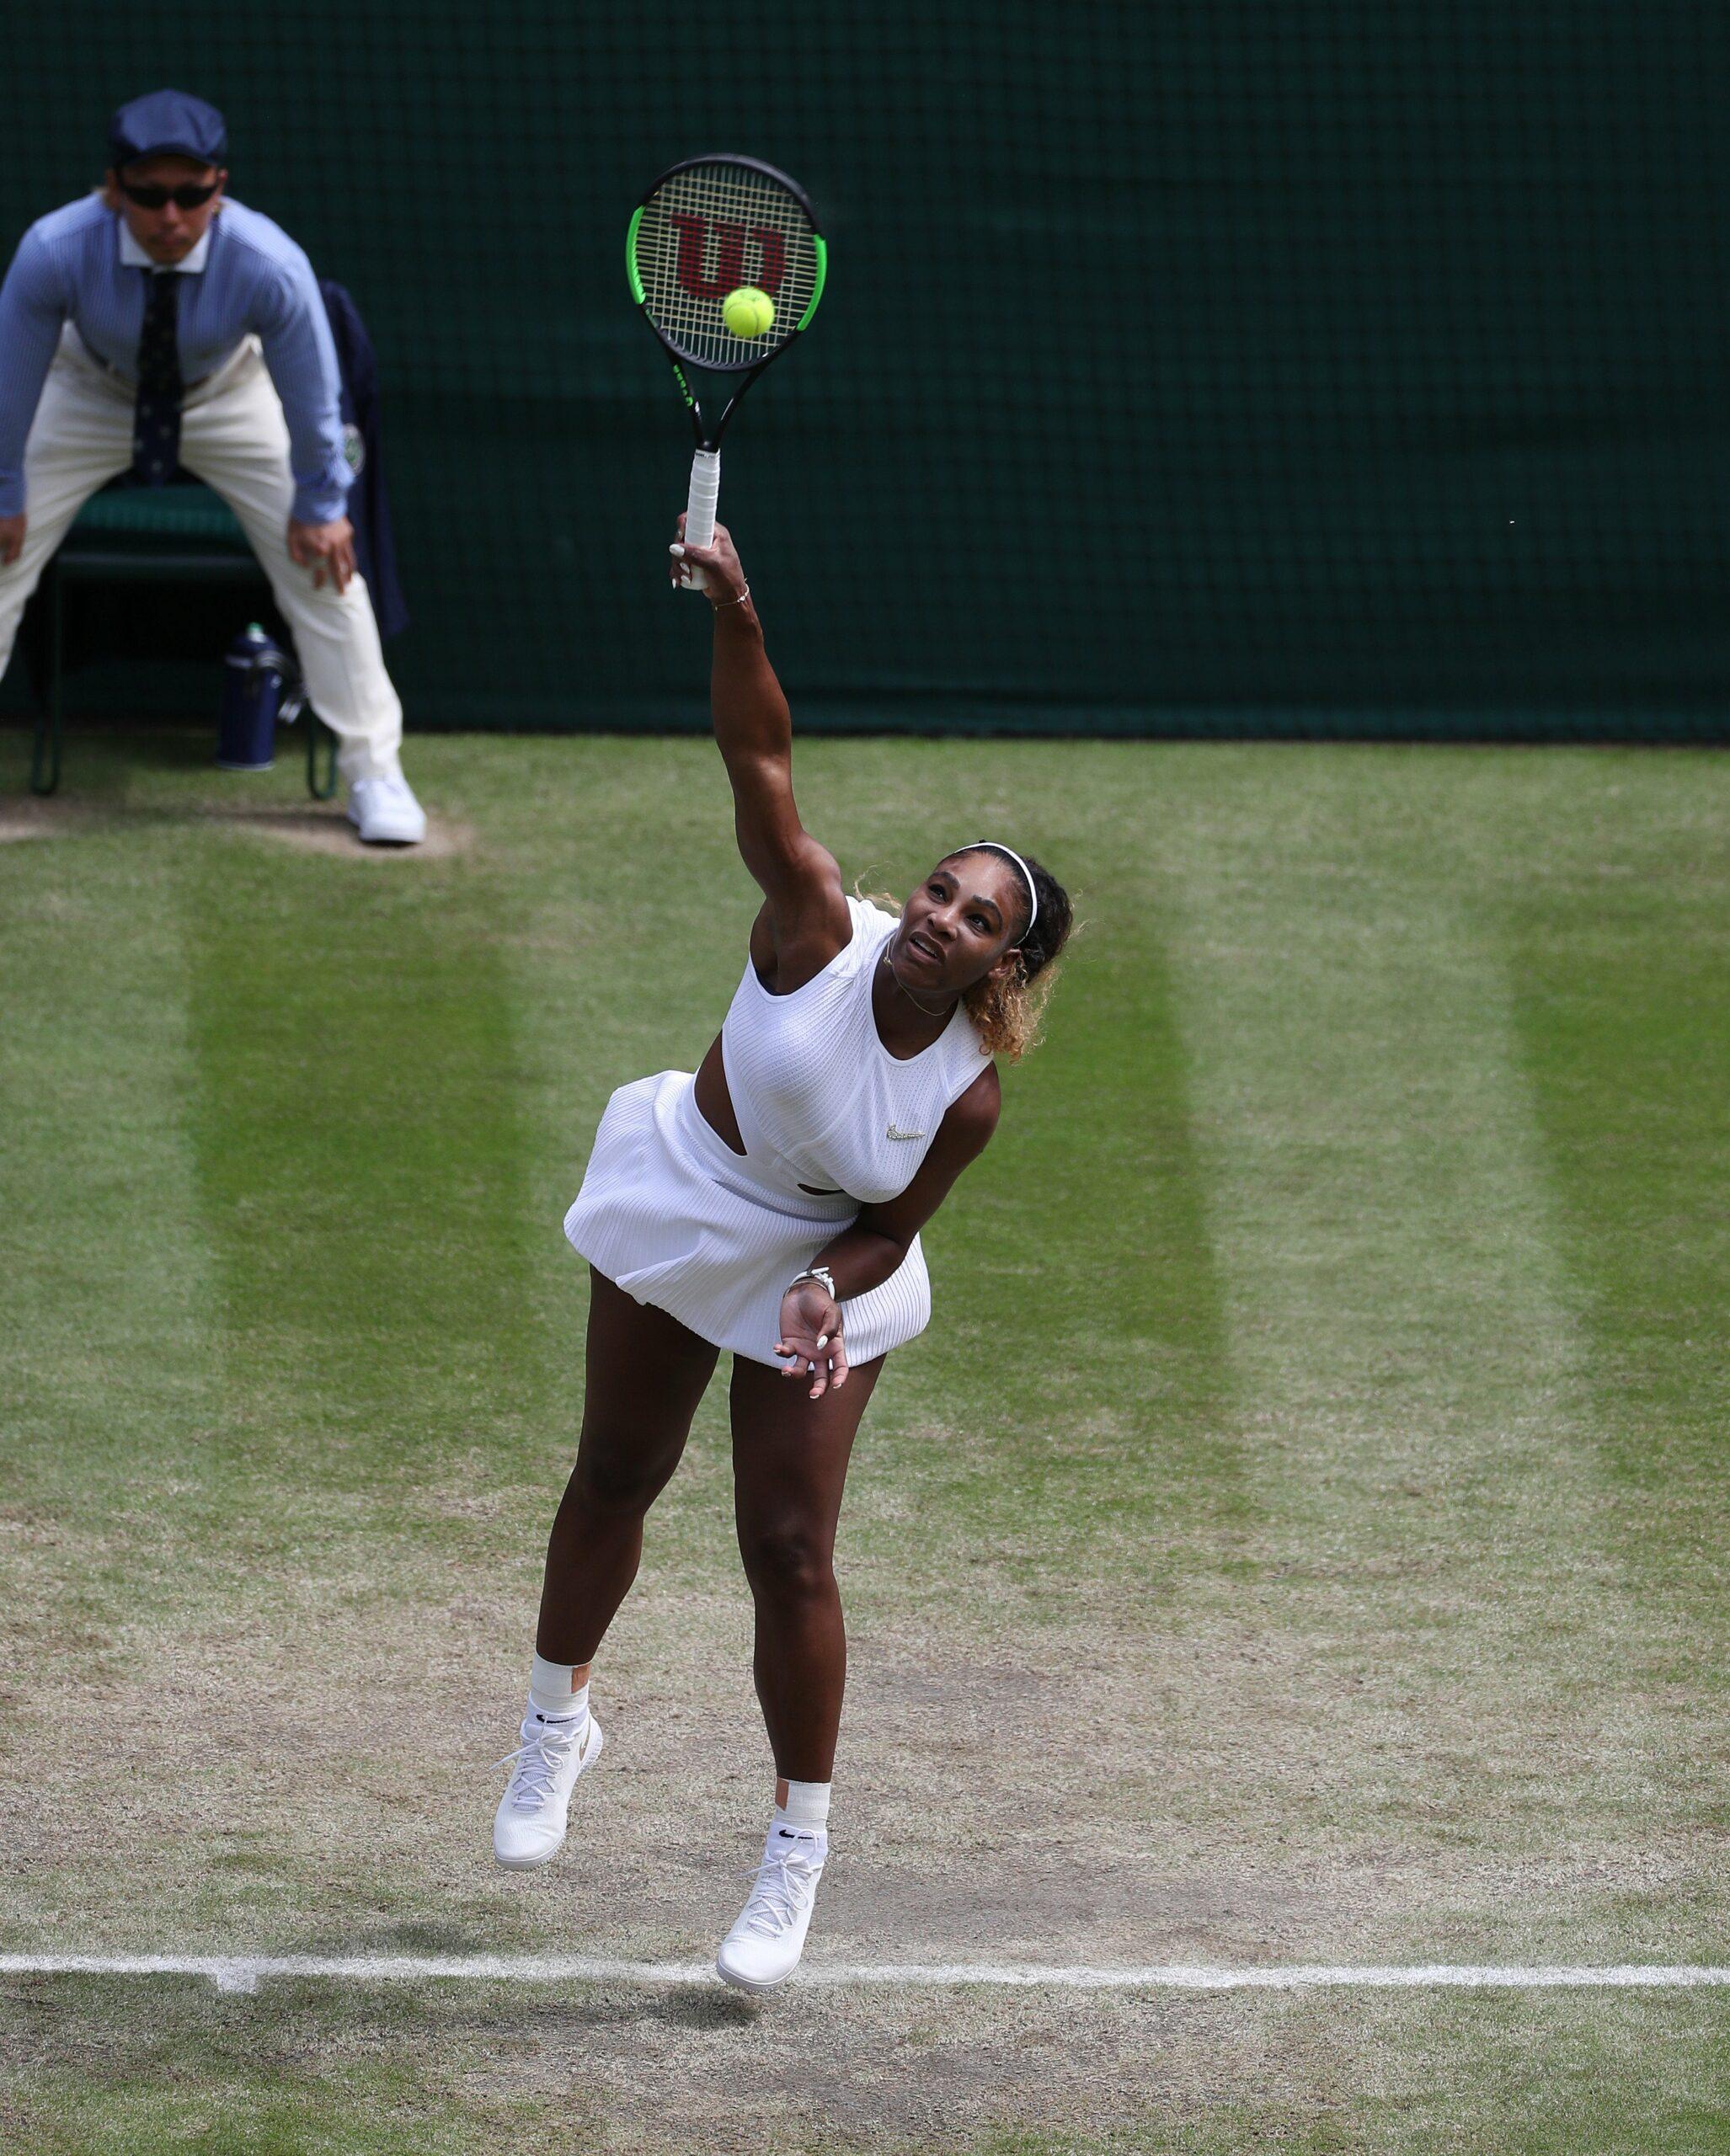 Serena Williams defeats Barbora Strycova in straight sets on Center Court to reach a Grand Slam final for the 13th consecutive year